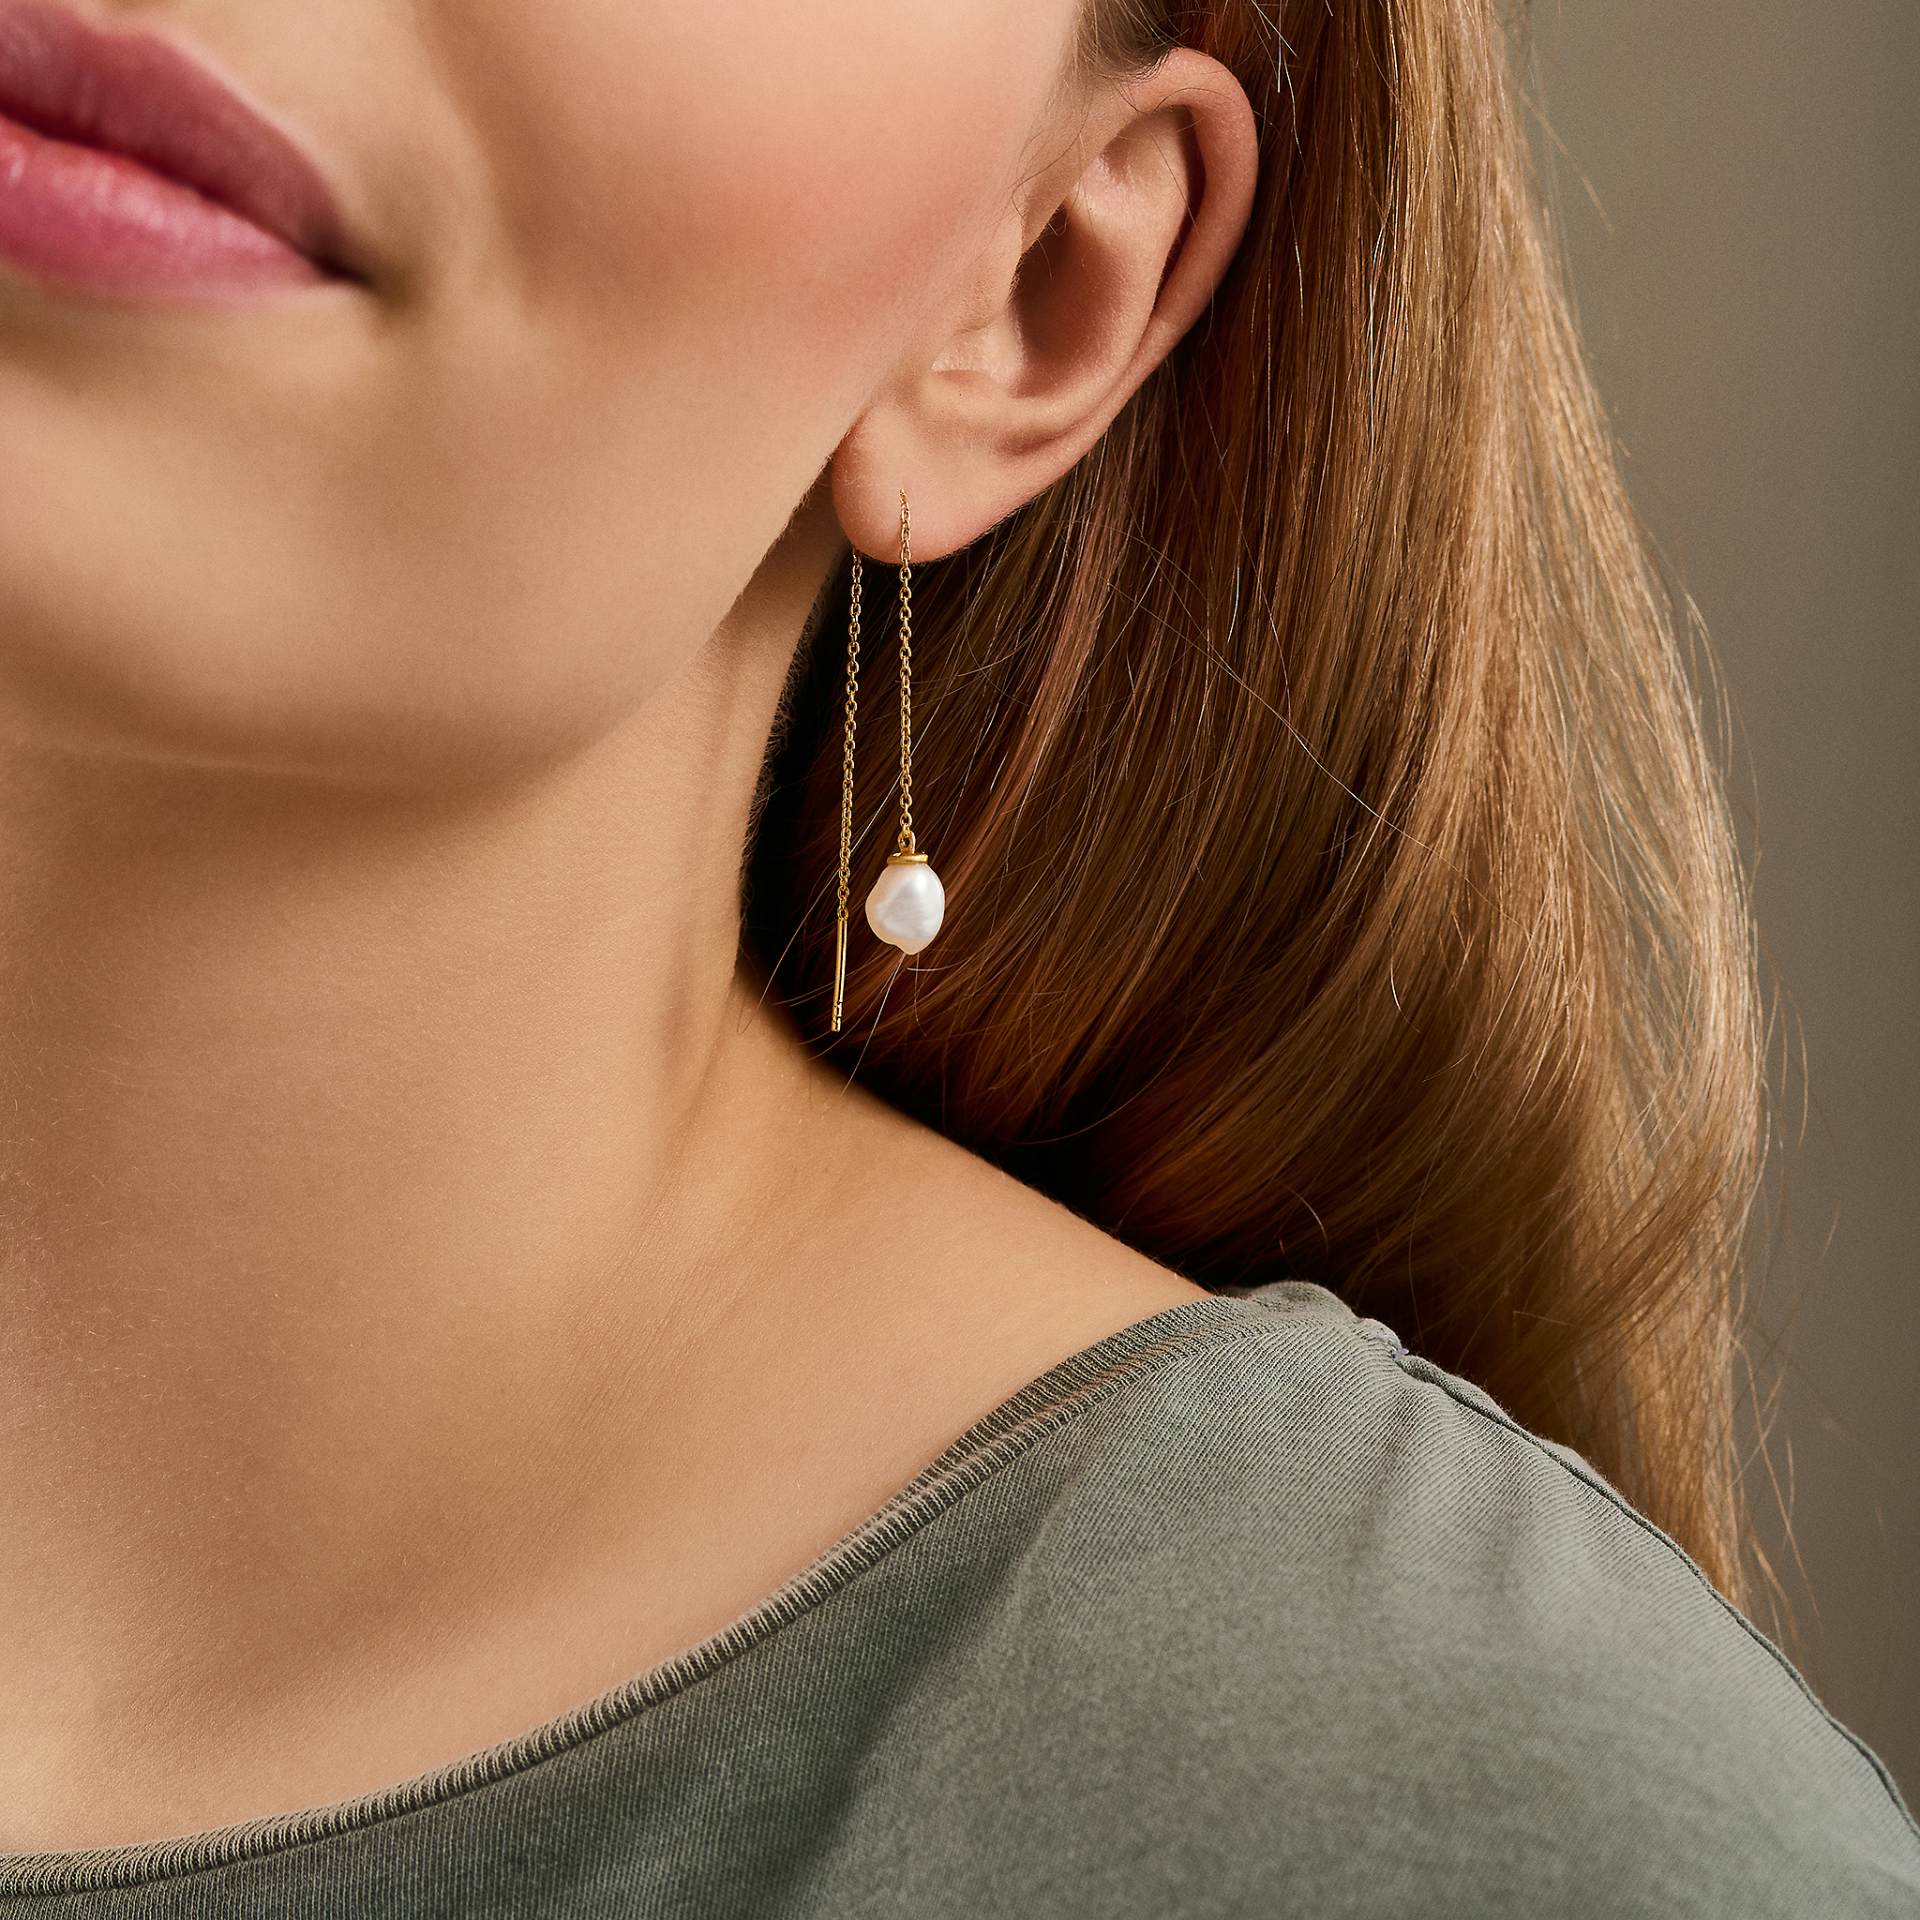 Lagoon earchains from Pernille Corydon in Goldplated-Silver Sterling 925